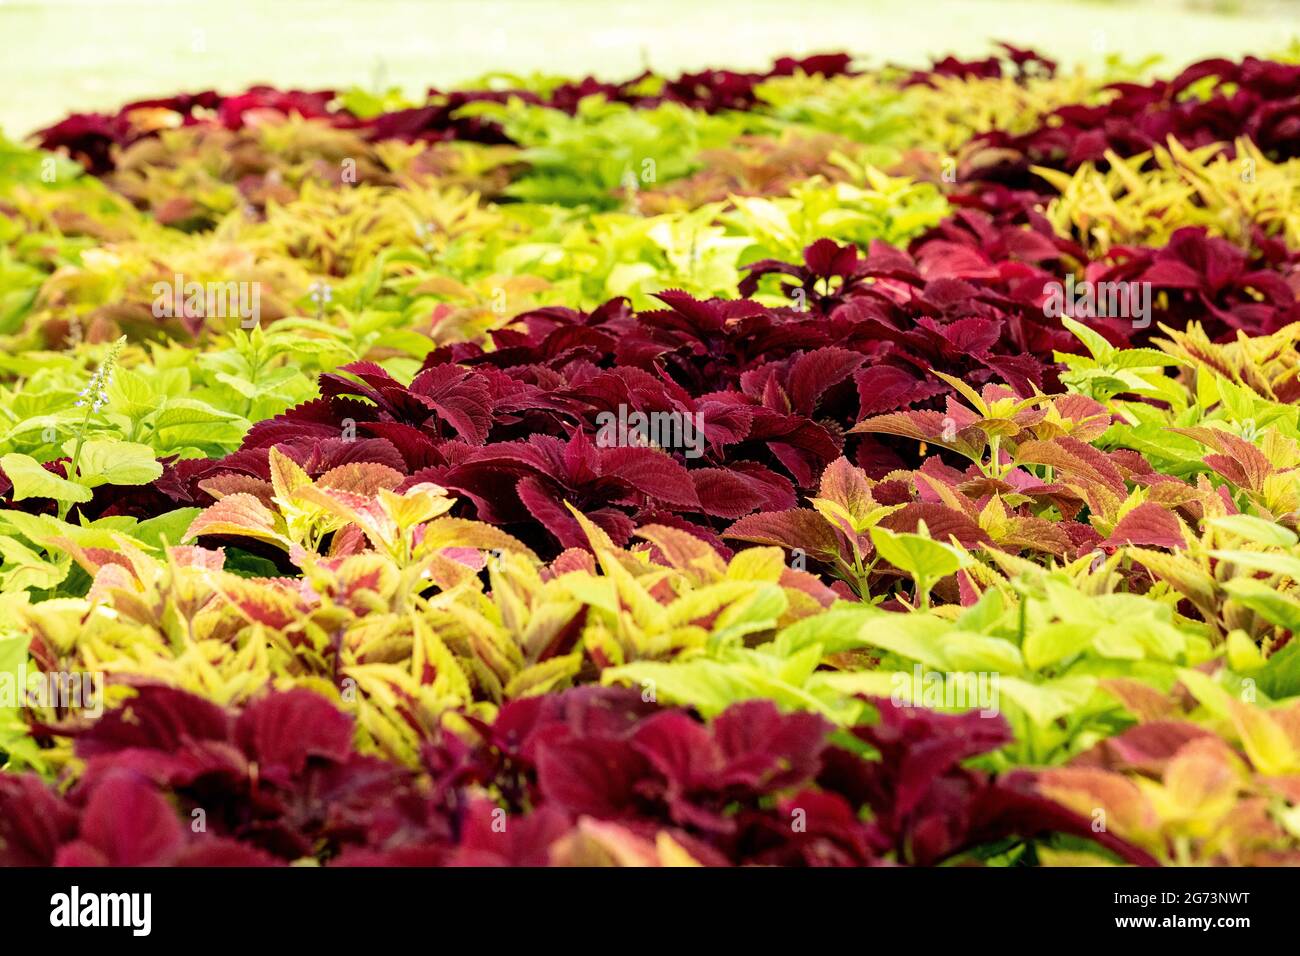 Background of green and pink Caladium plants in a garden in Naples, Florida. Stock Photo